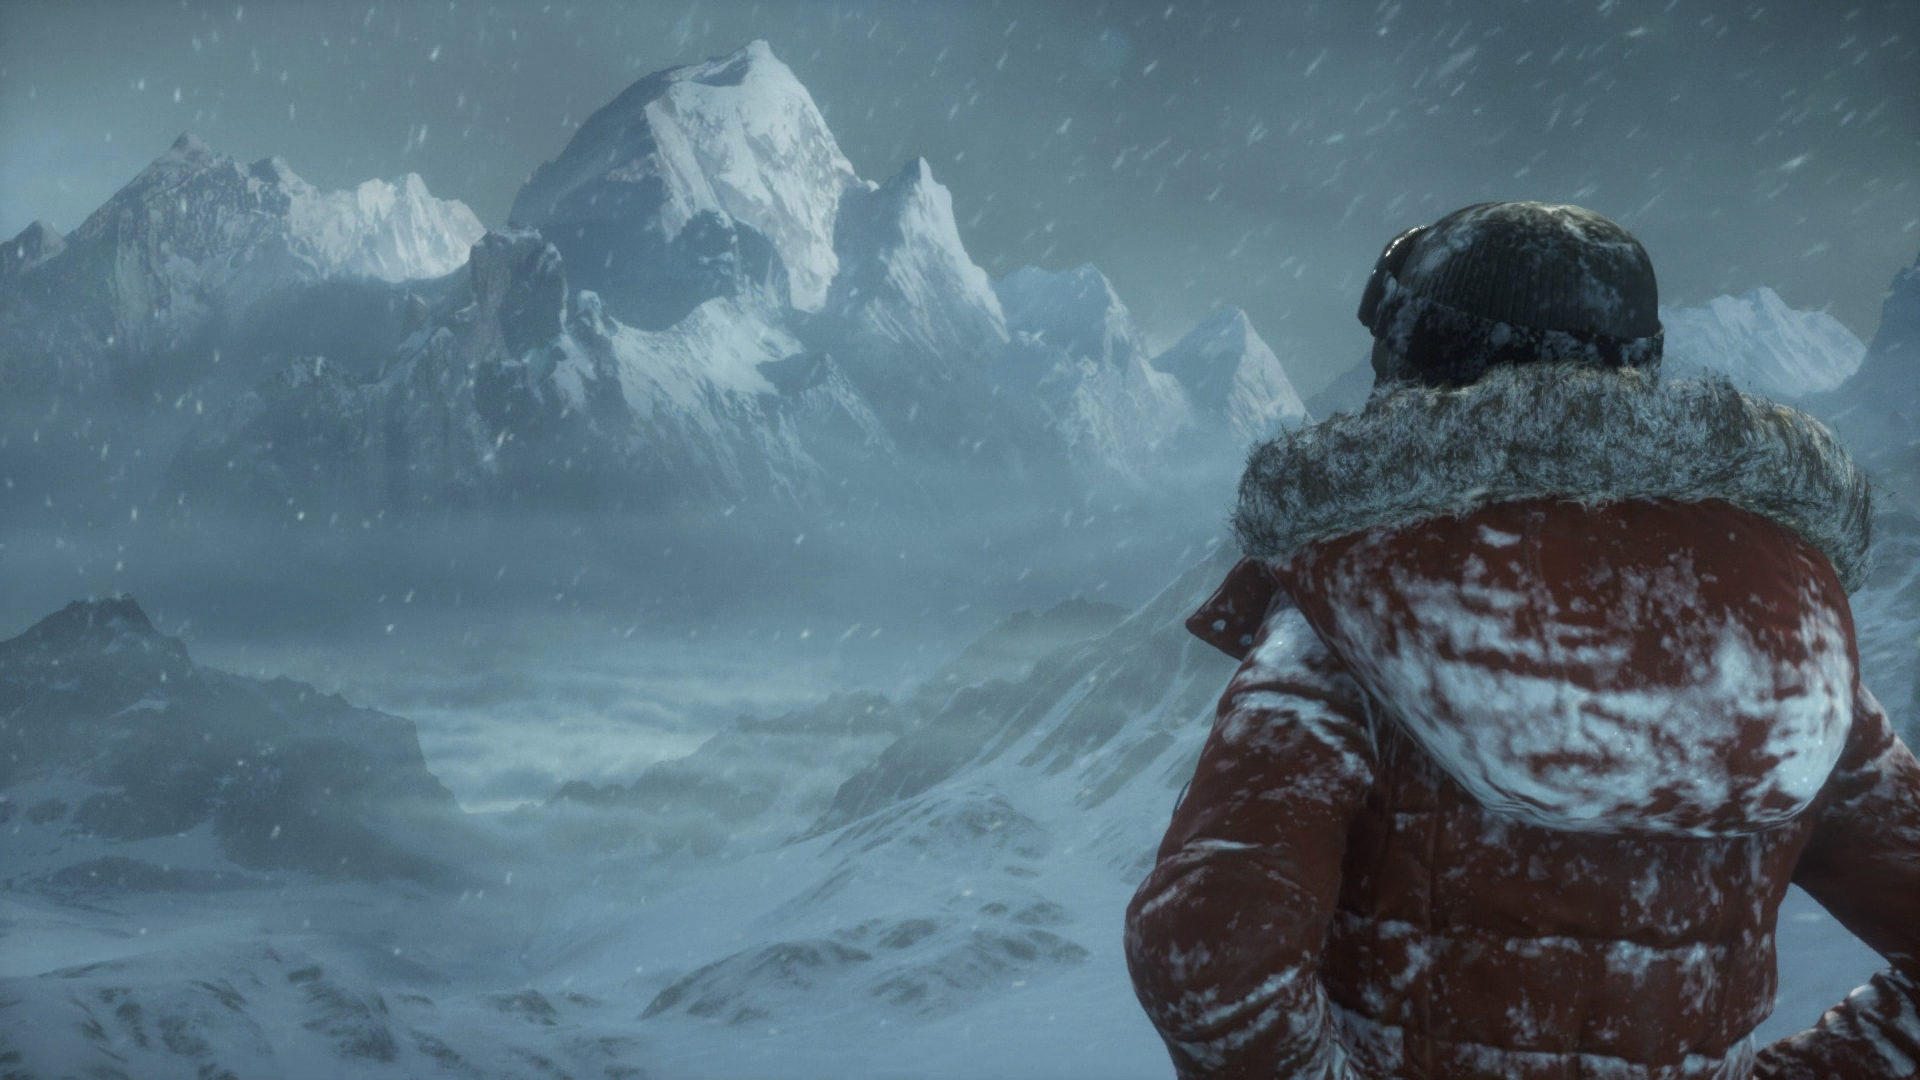 General 1920x1080 Rise of the Tomb Raider Tomb Raider screen shot mountains video games PC gaming cold ice video game landscape snow Lara Croft (Tomb Raider)